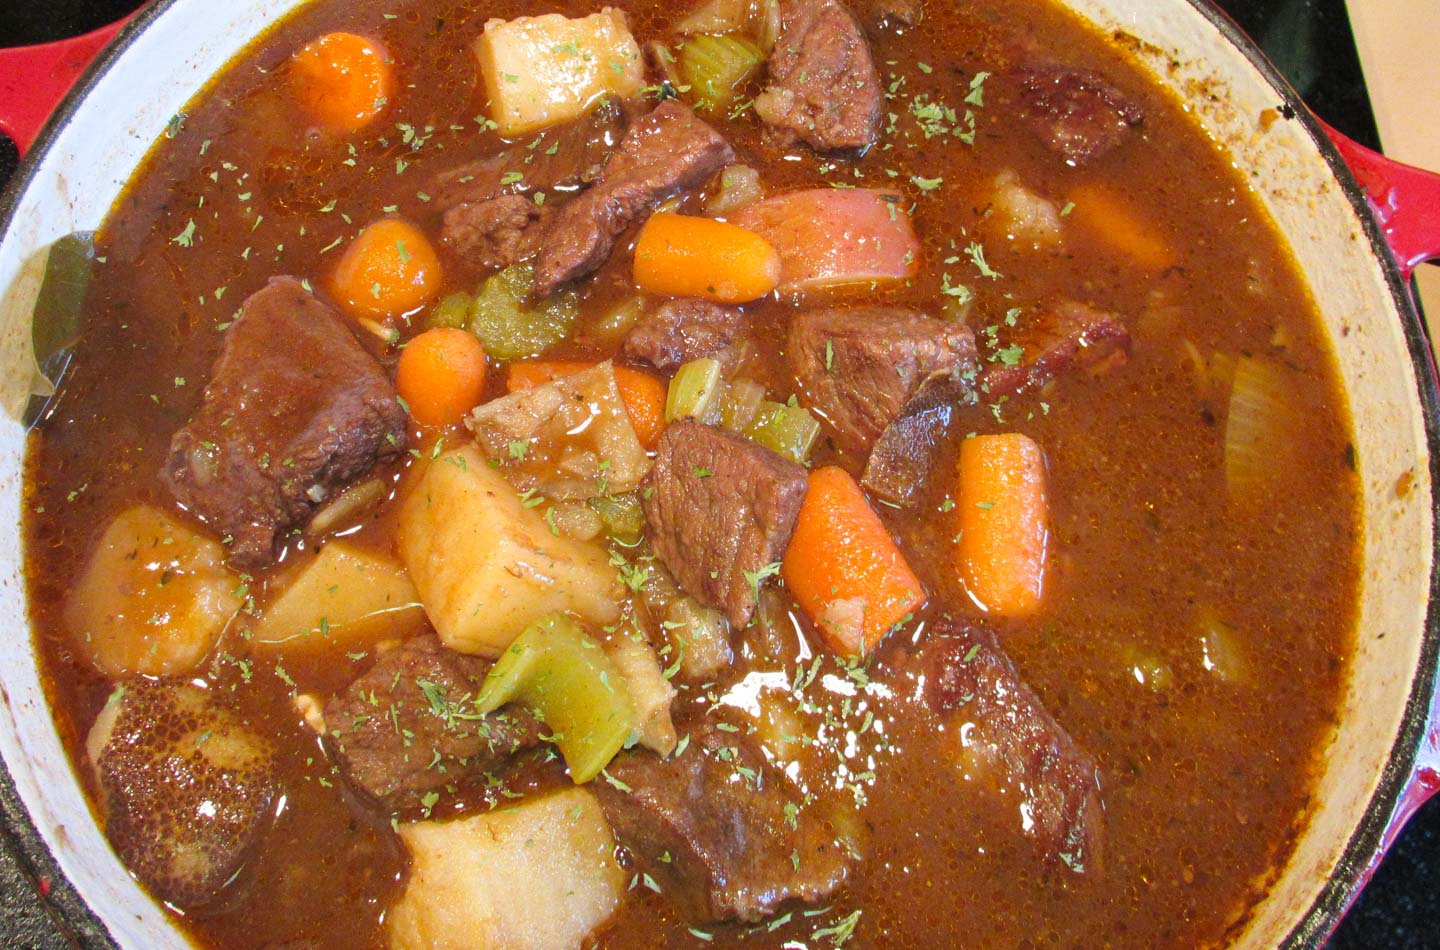 Pot of beef stew with potatoes, carrots and vegetables in rich gravy.